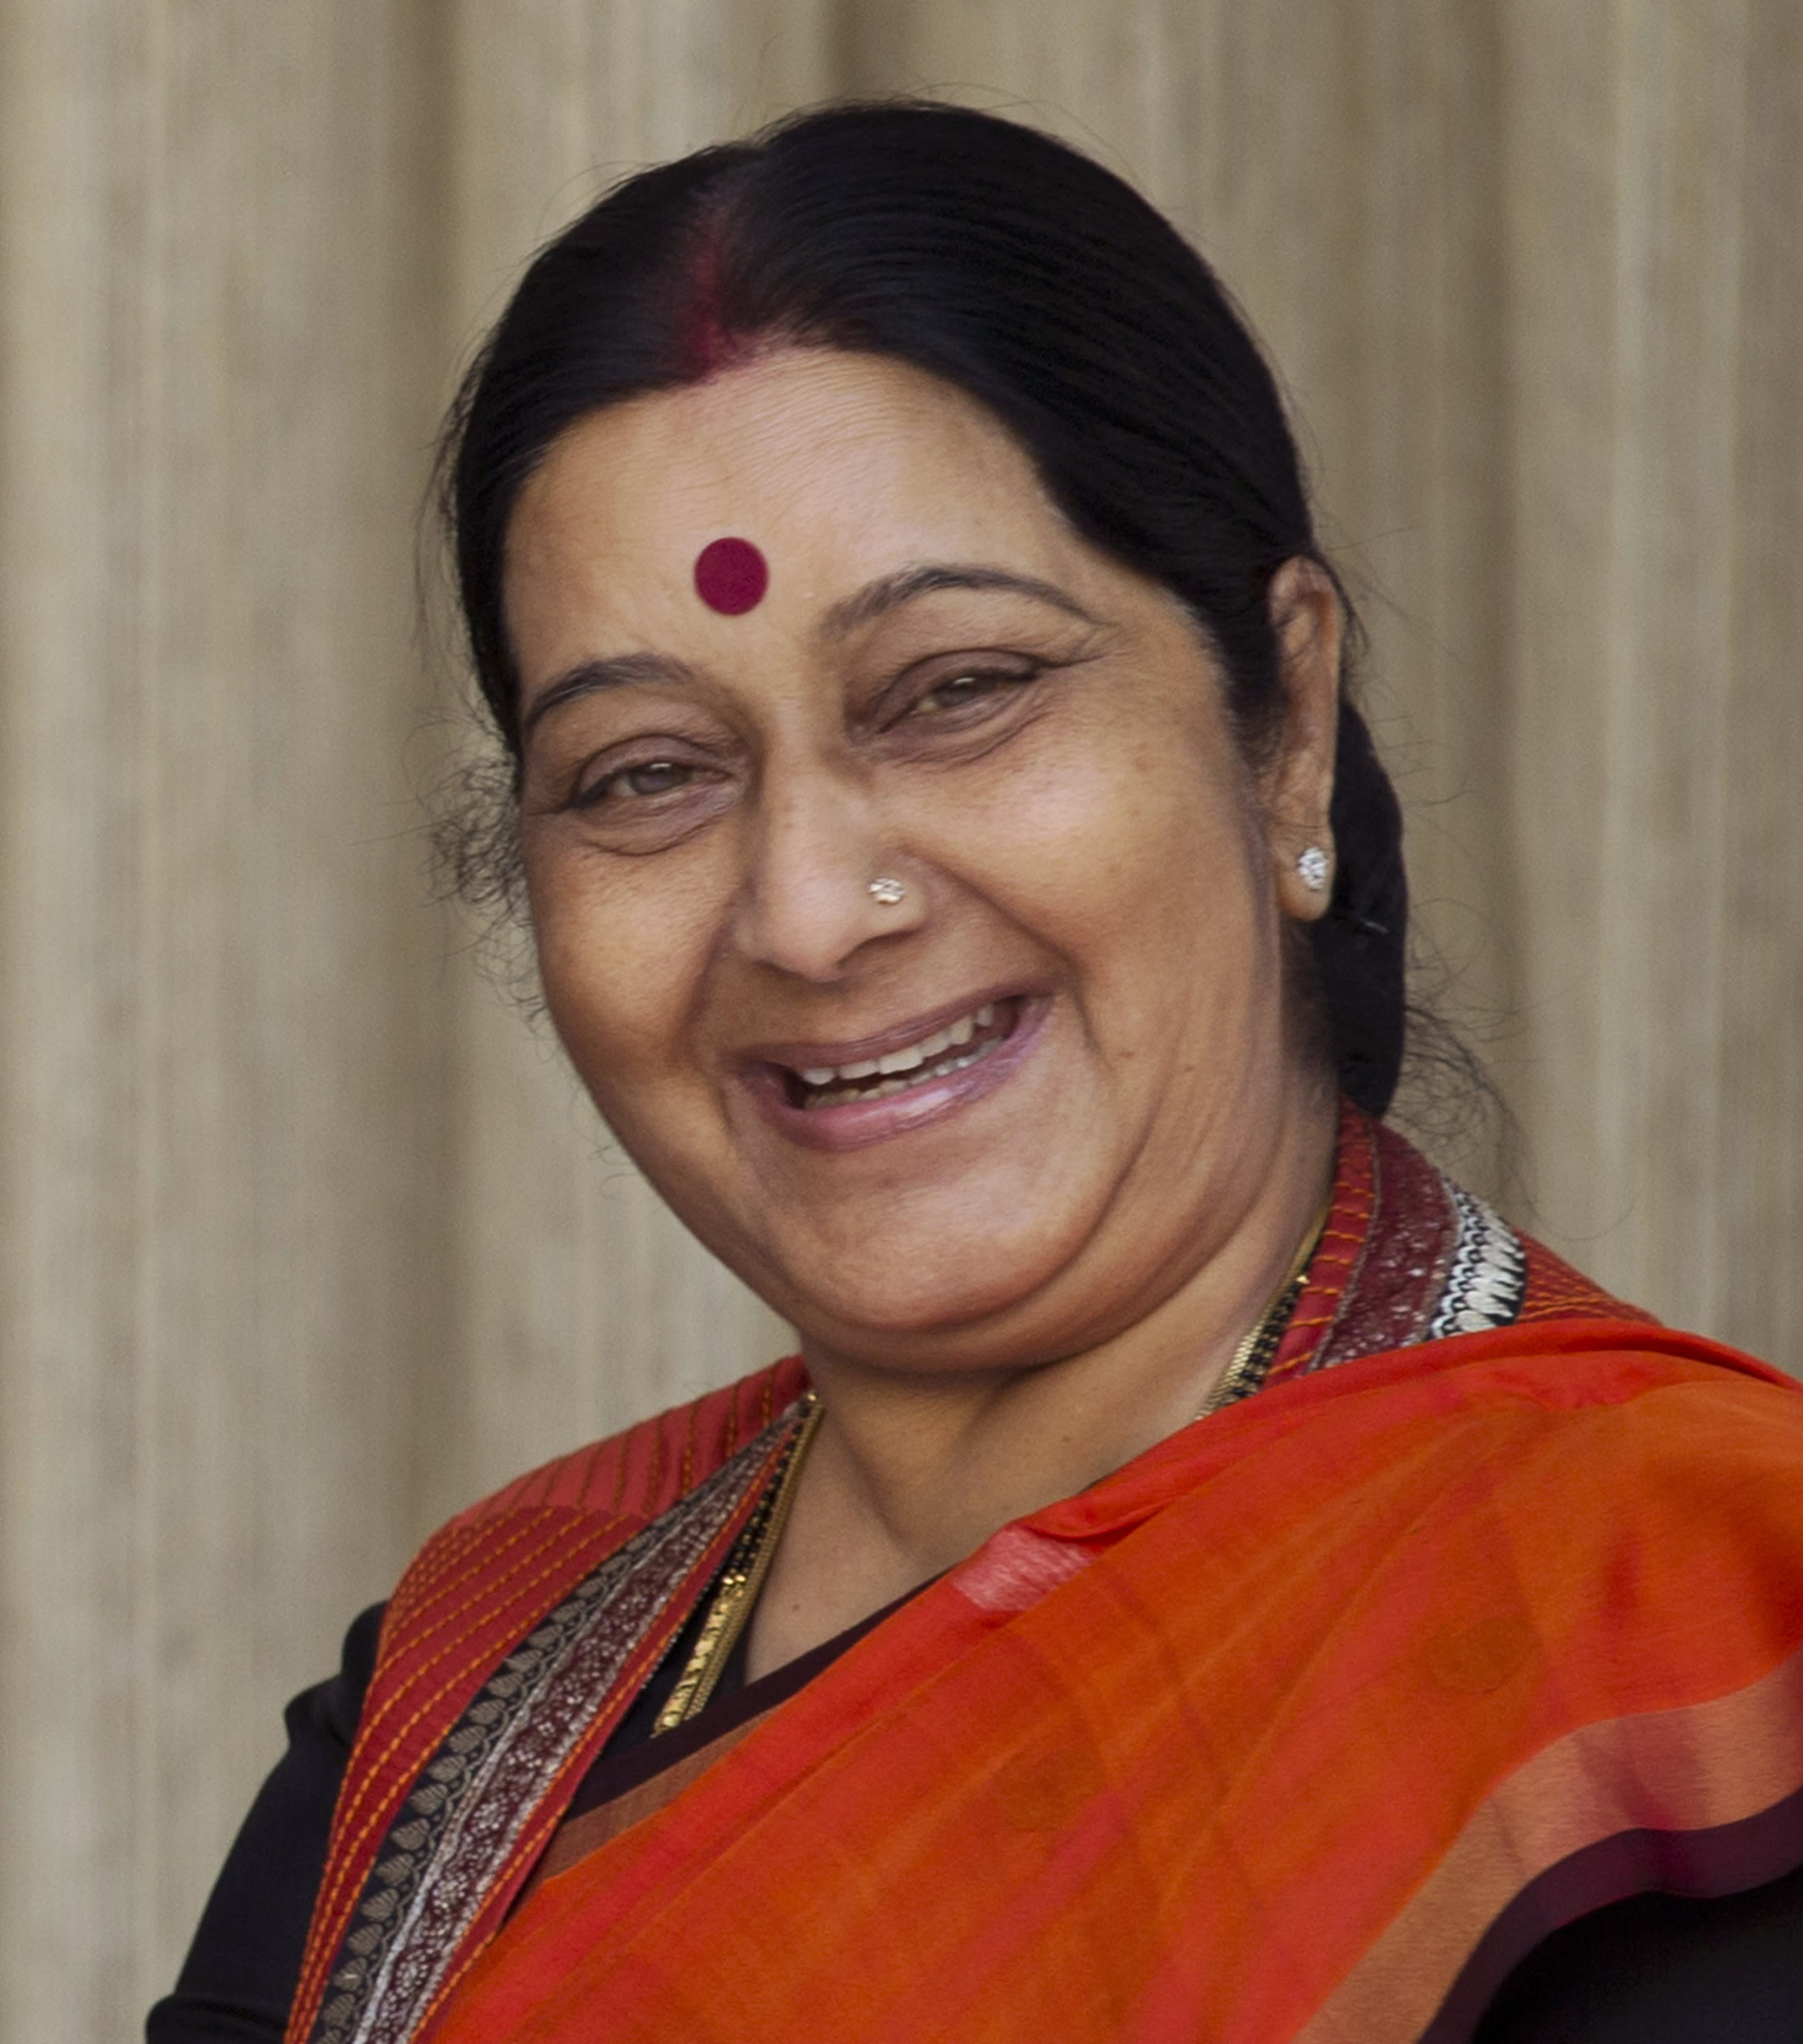 Indias Former Foreign Minister Sushma Swaraj Dies At 67 6162